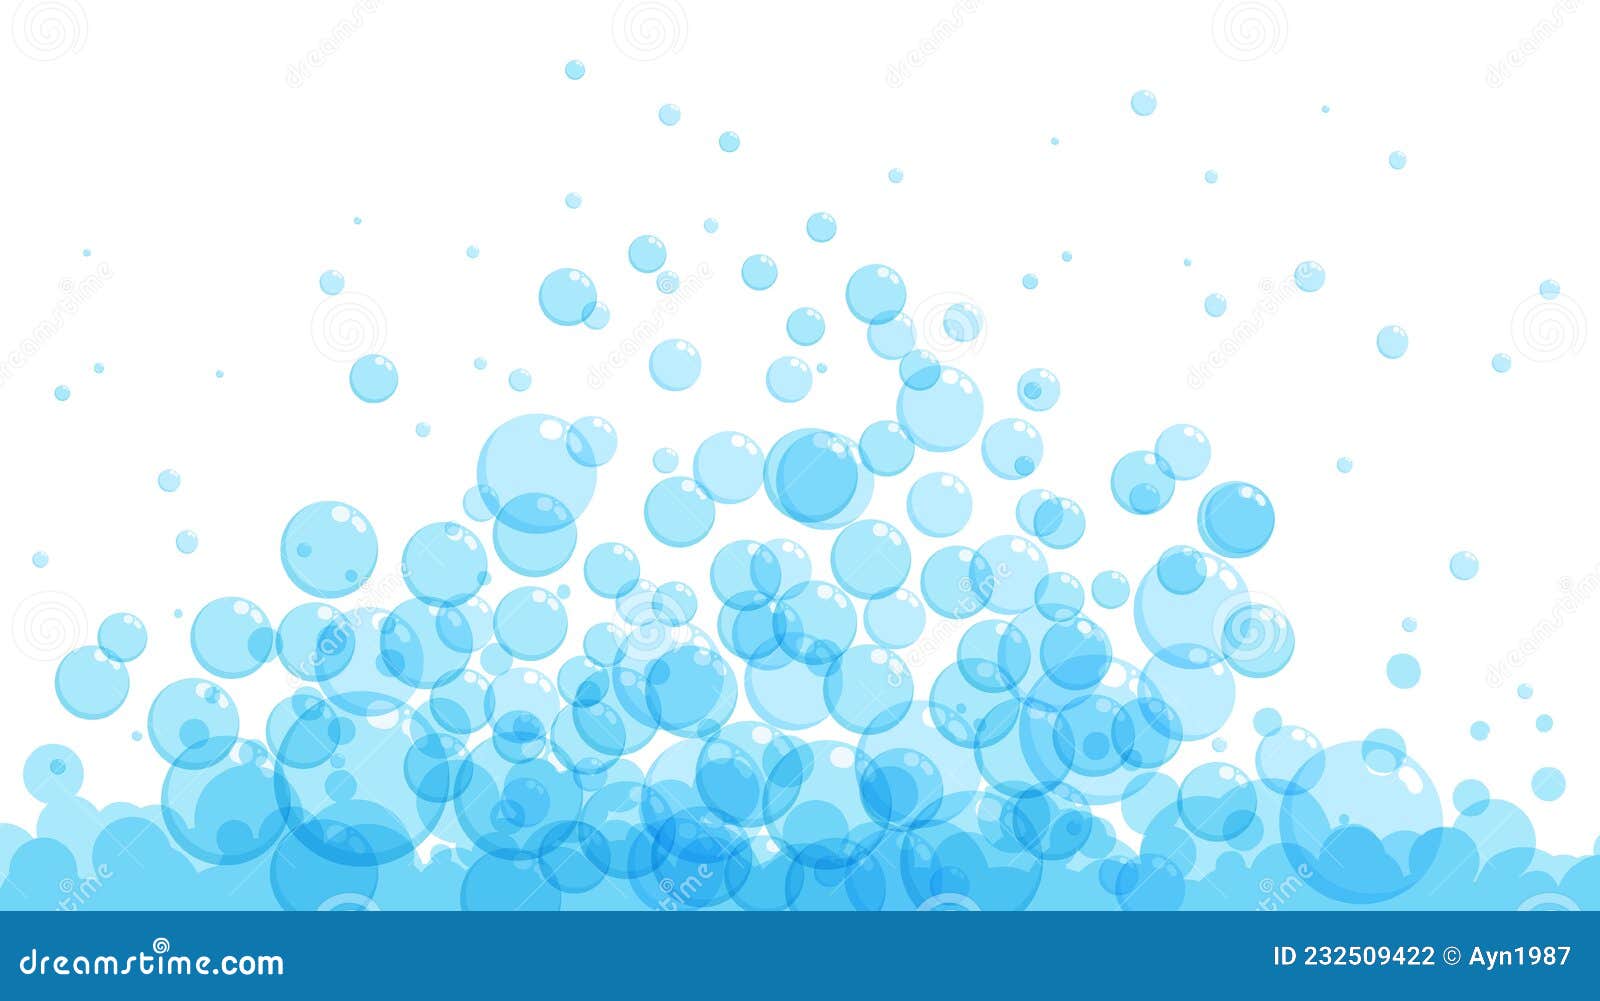 Soap Bubbles in Cartoon Style. a Foam Sample with Blue Round Shapes ...